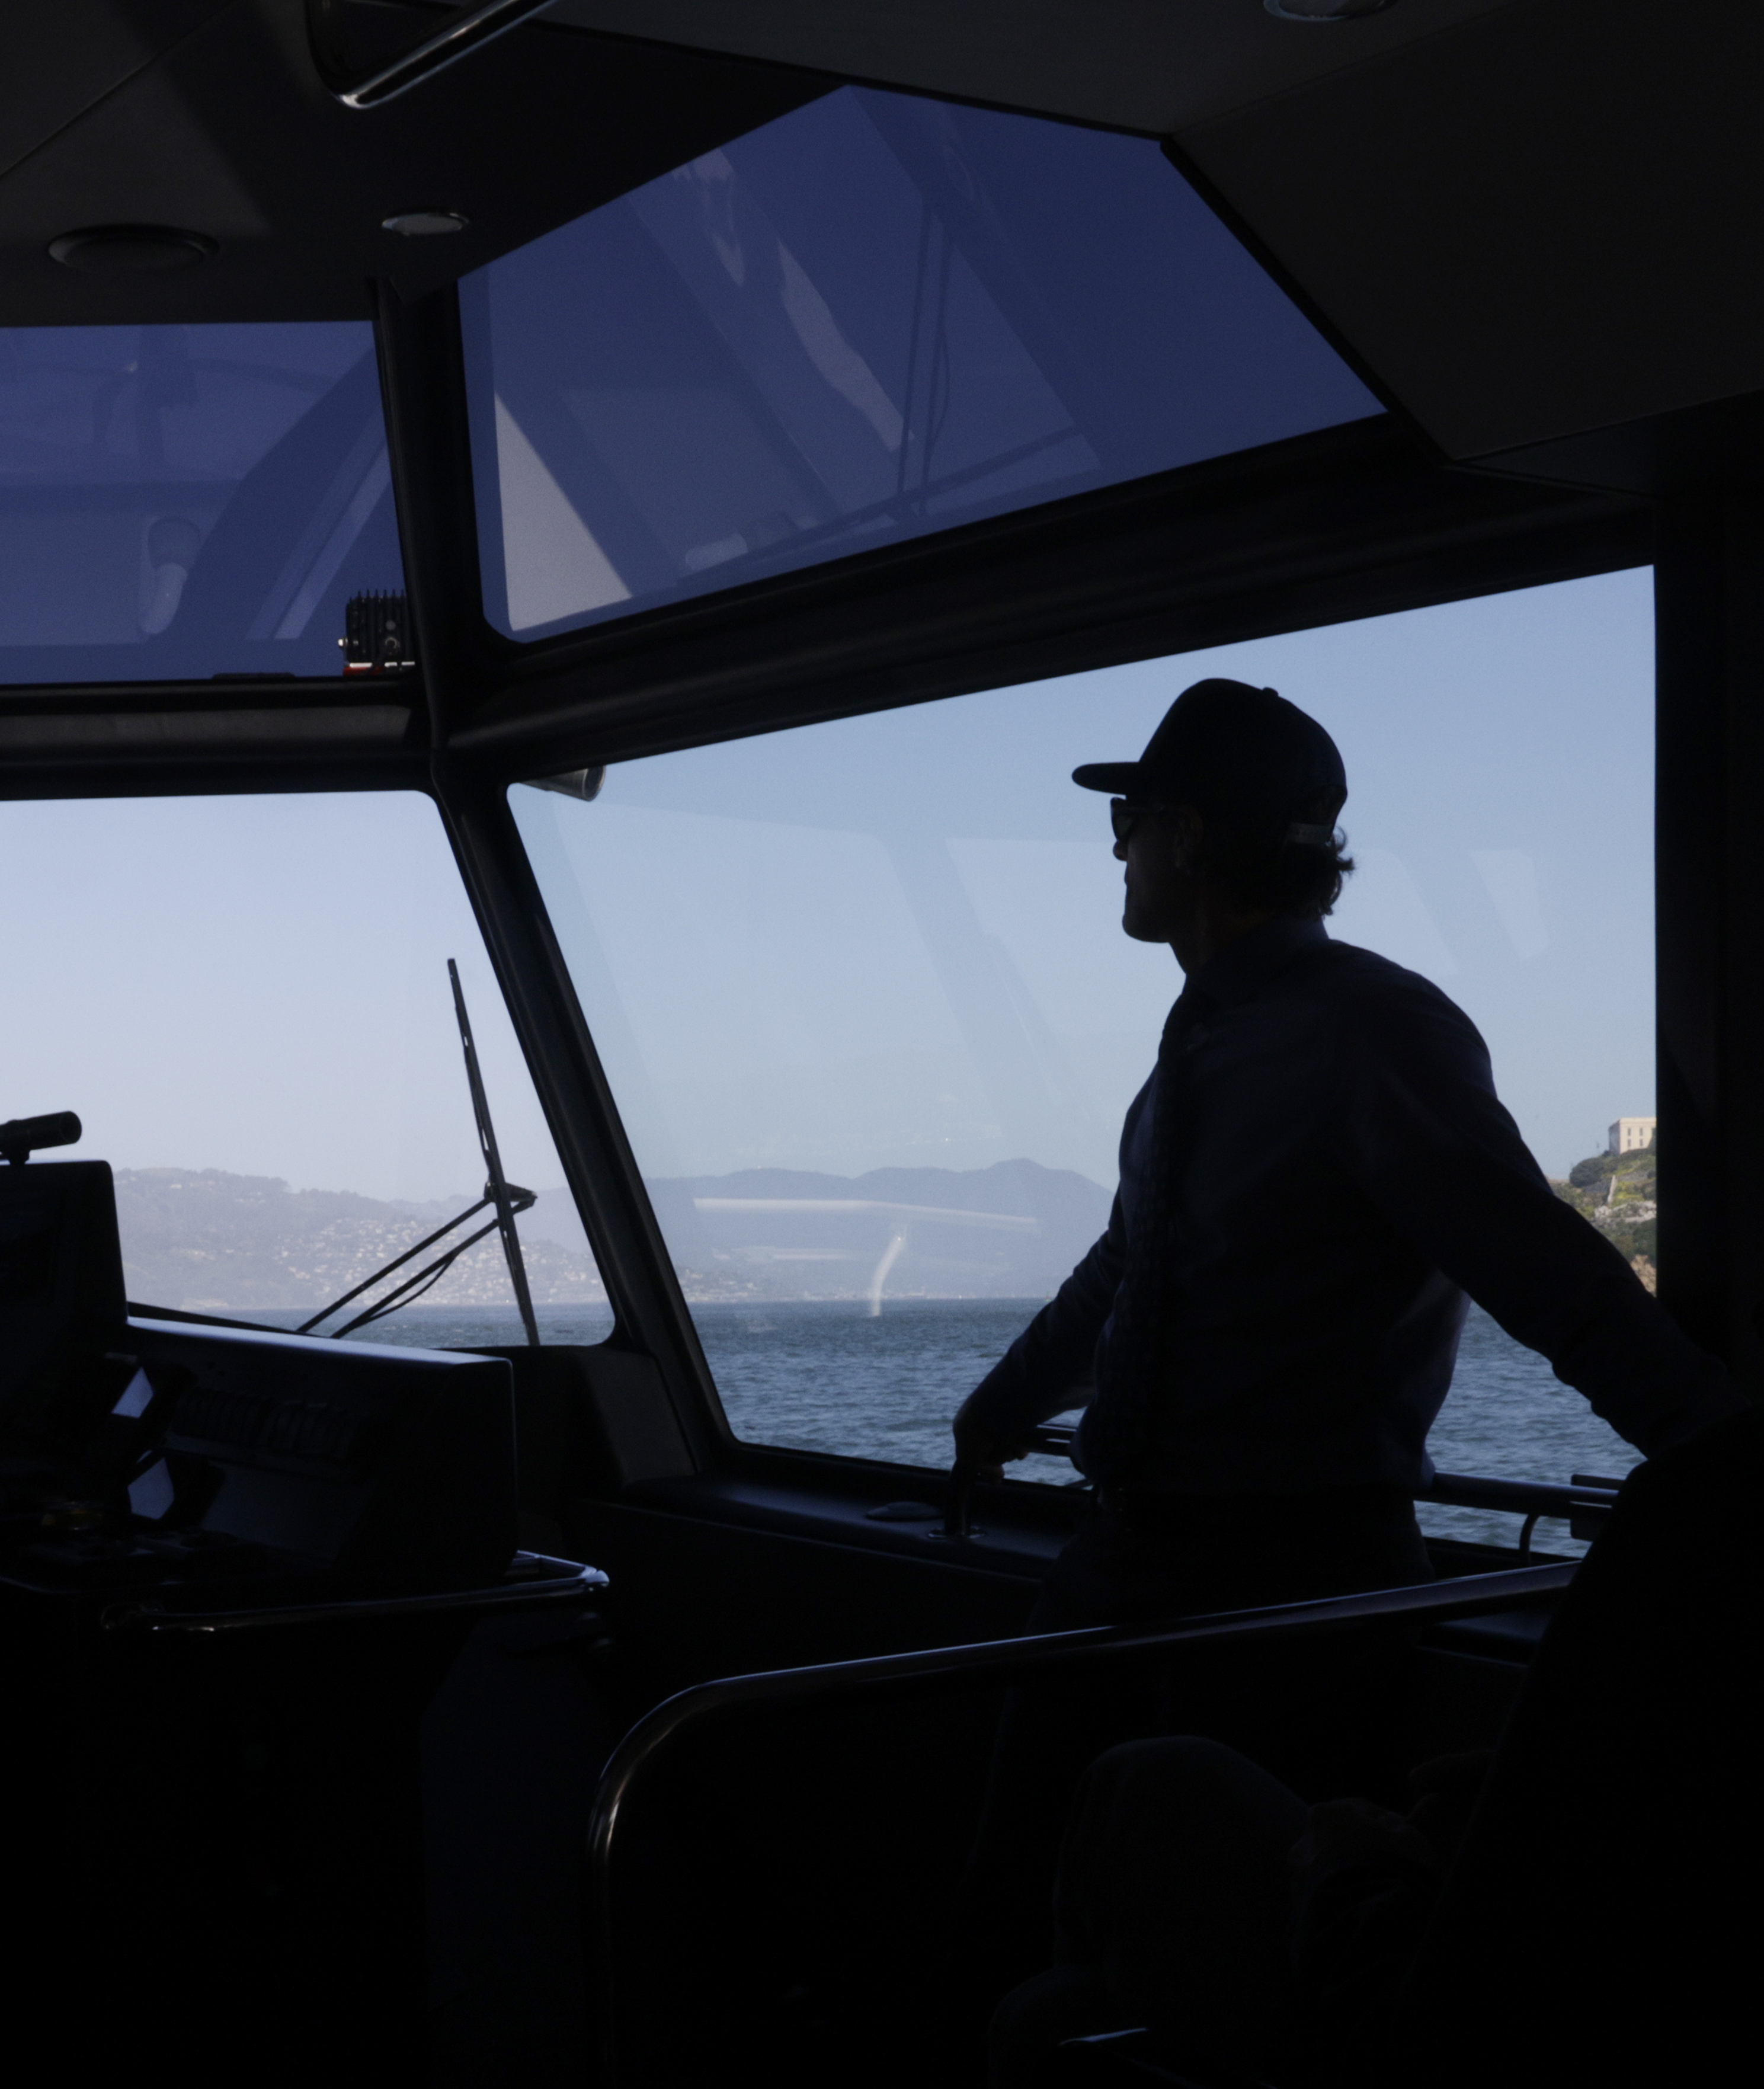 A silhouette of a person piloting a boat, with a clear view of the sea and horizon through the windows.